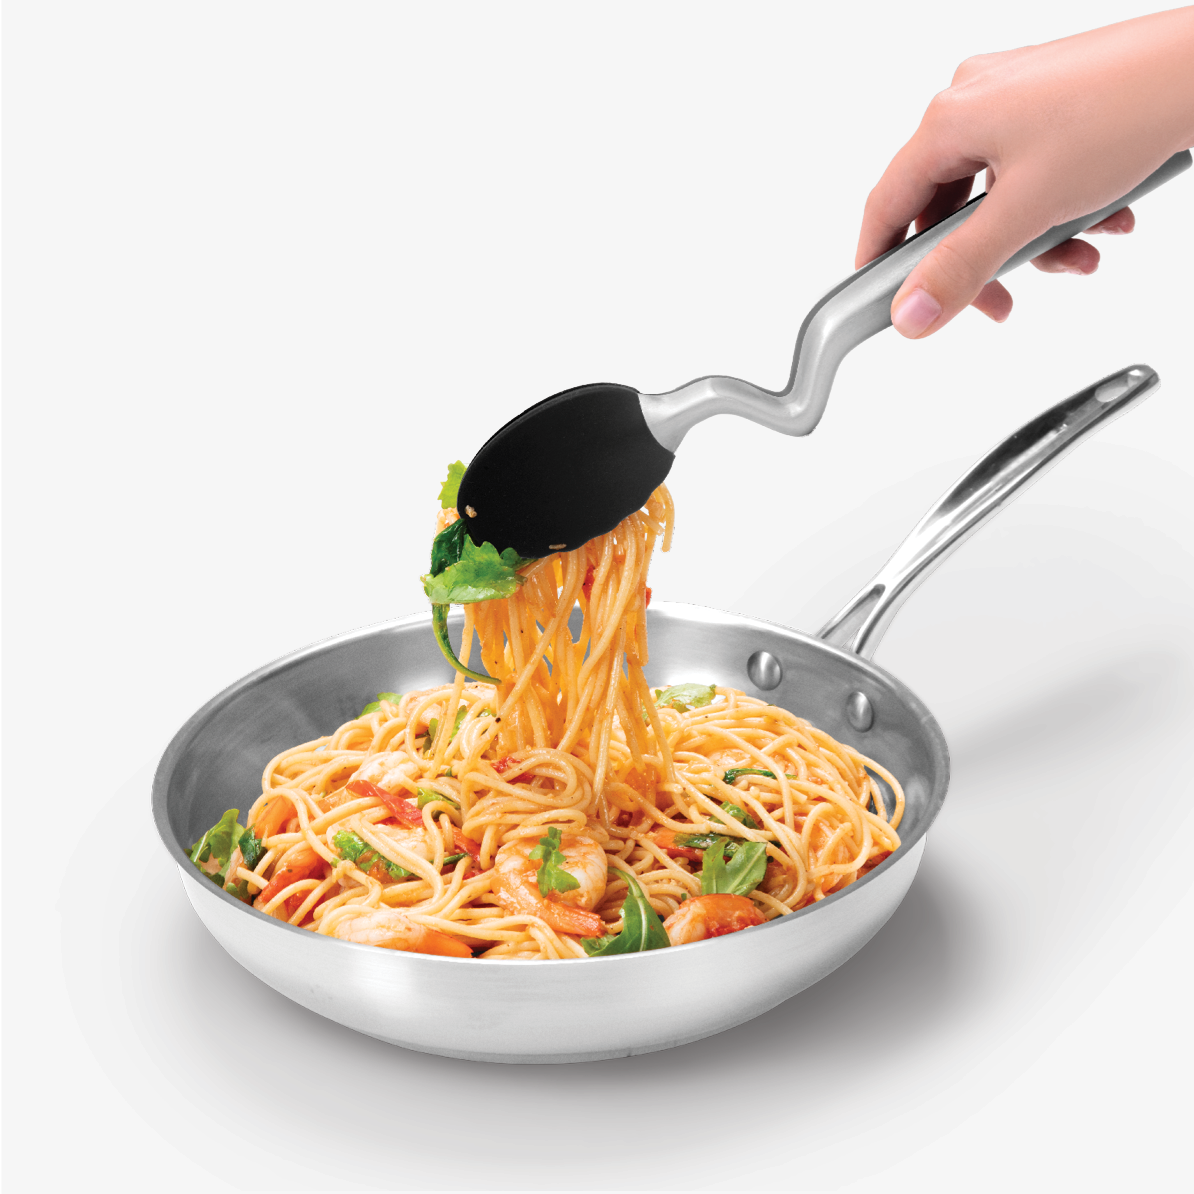 The ultimate all-in-one flipping, mixing and serving utensil is here with Dreamfarm's 12" Clongs Silicone Tongs in Black. These unique tongs stand out from the crowd and sit up on your counter with a C-shaped bend in the handle that keeps the tips pointed up to prevent messes.